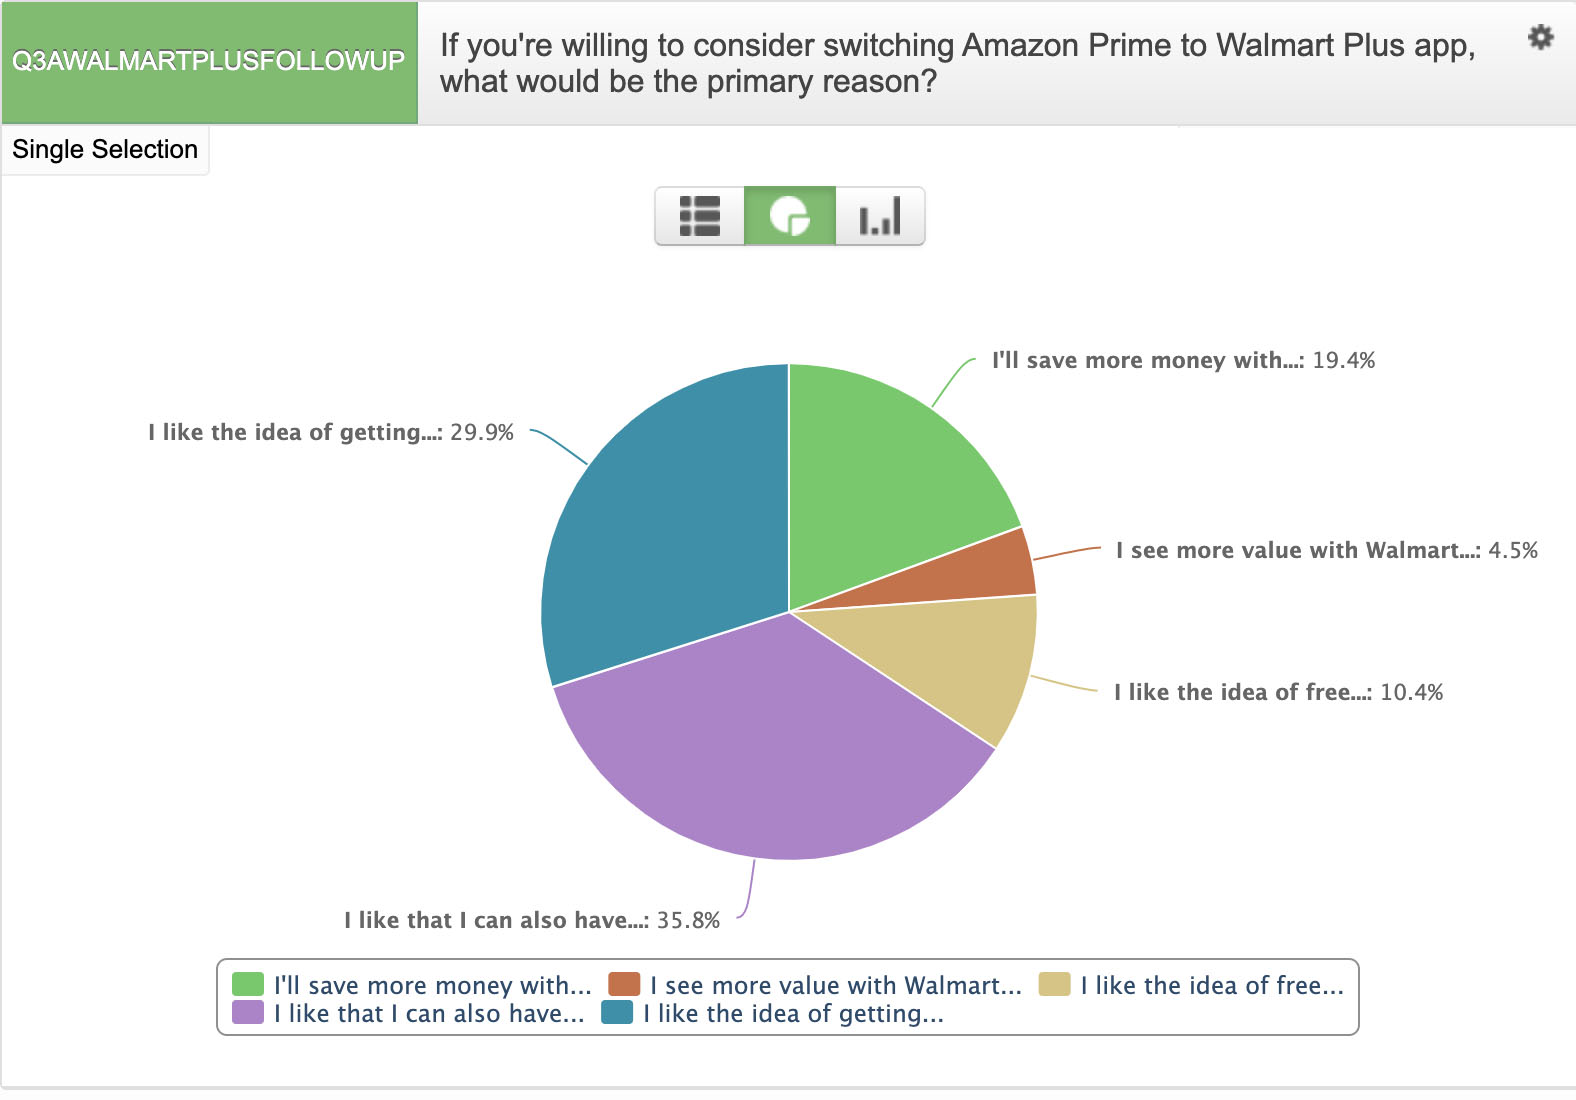 These answers are directly in line with Walmart’s strengths. 